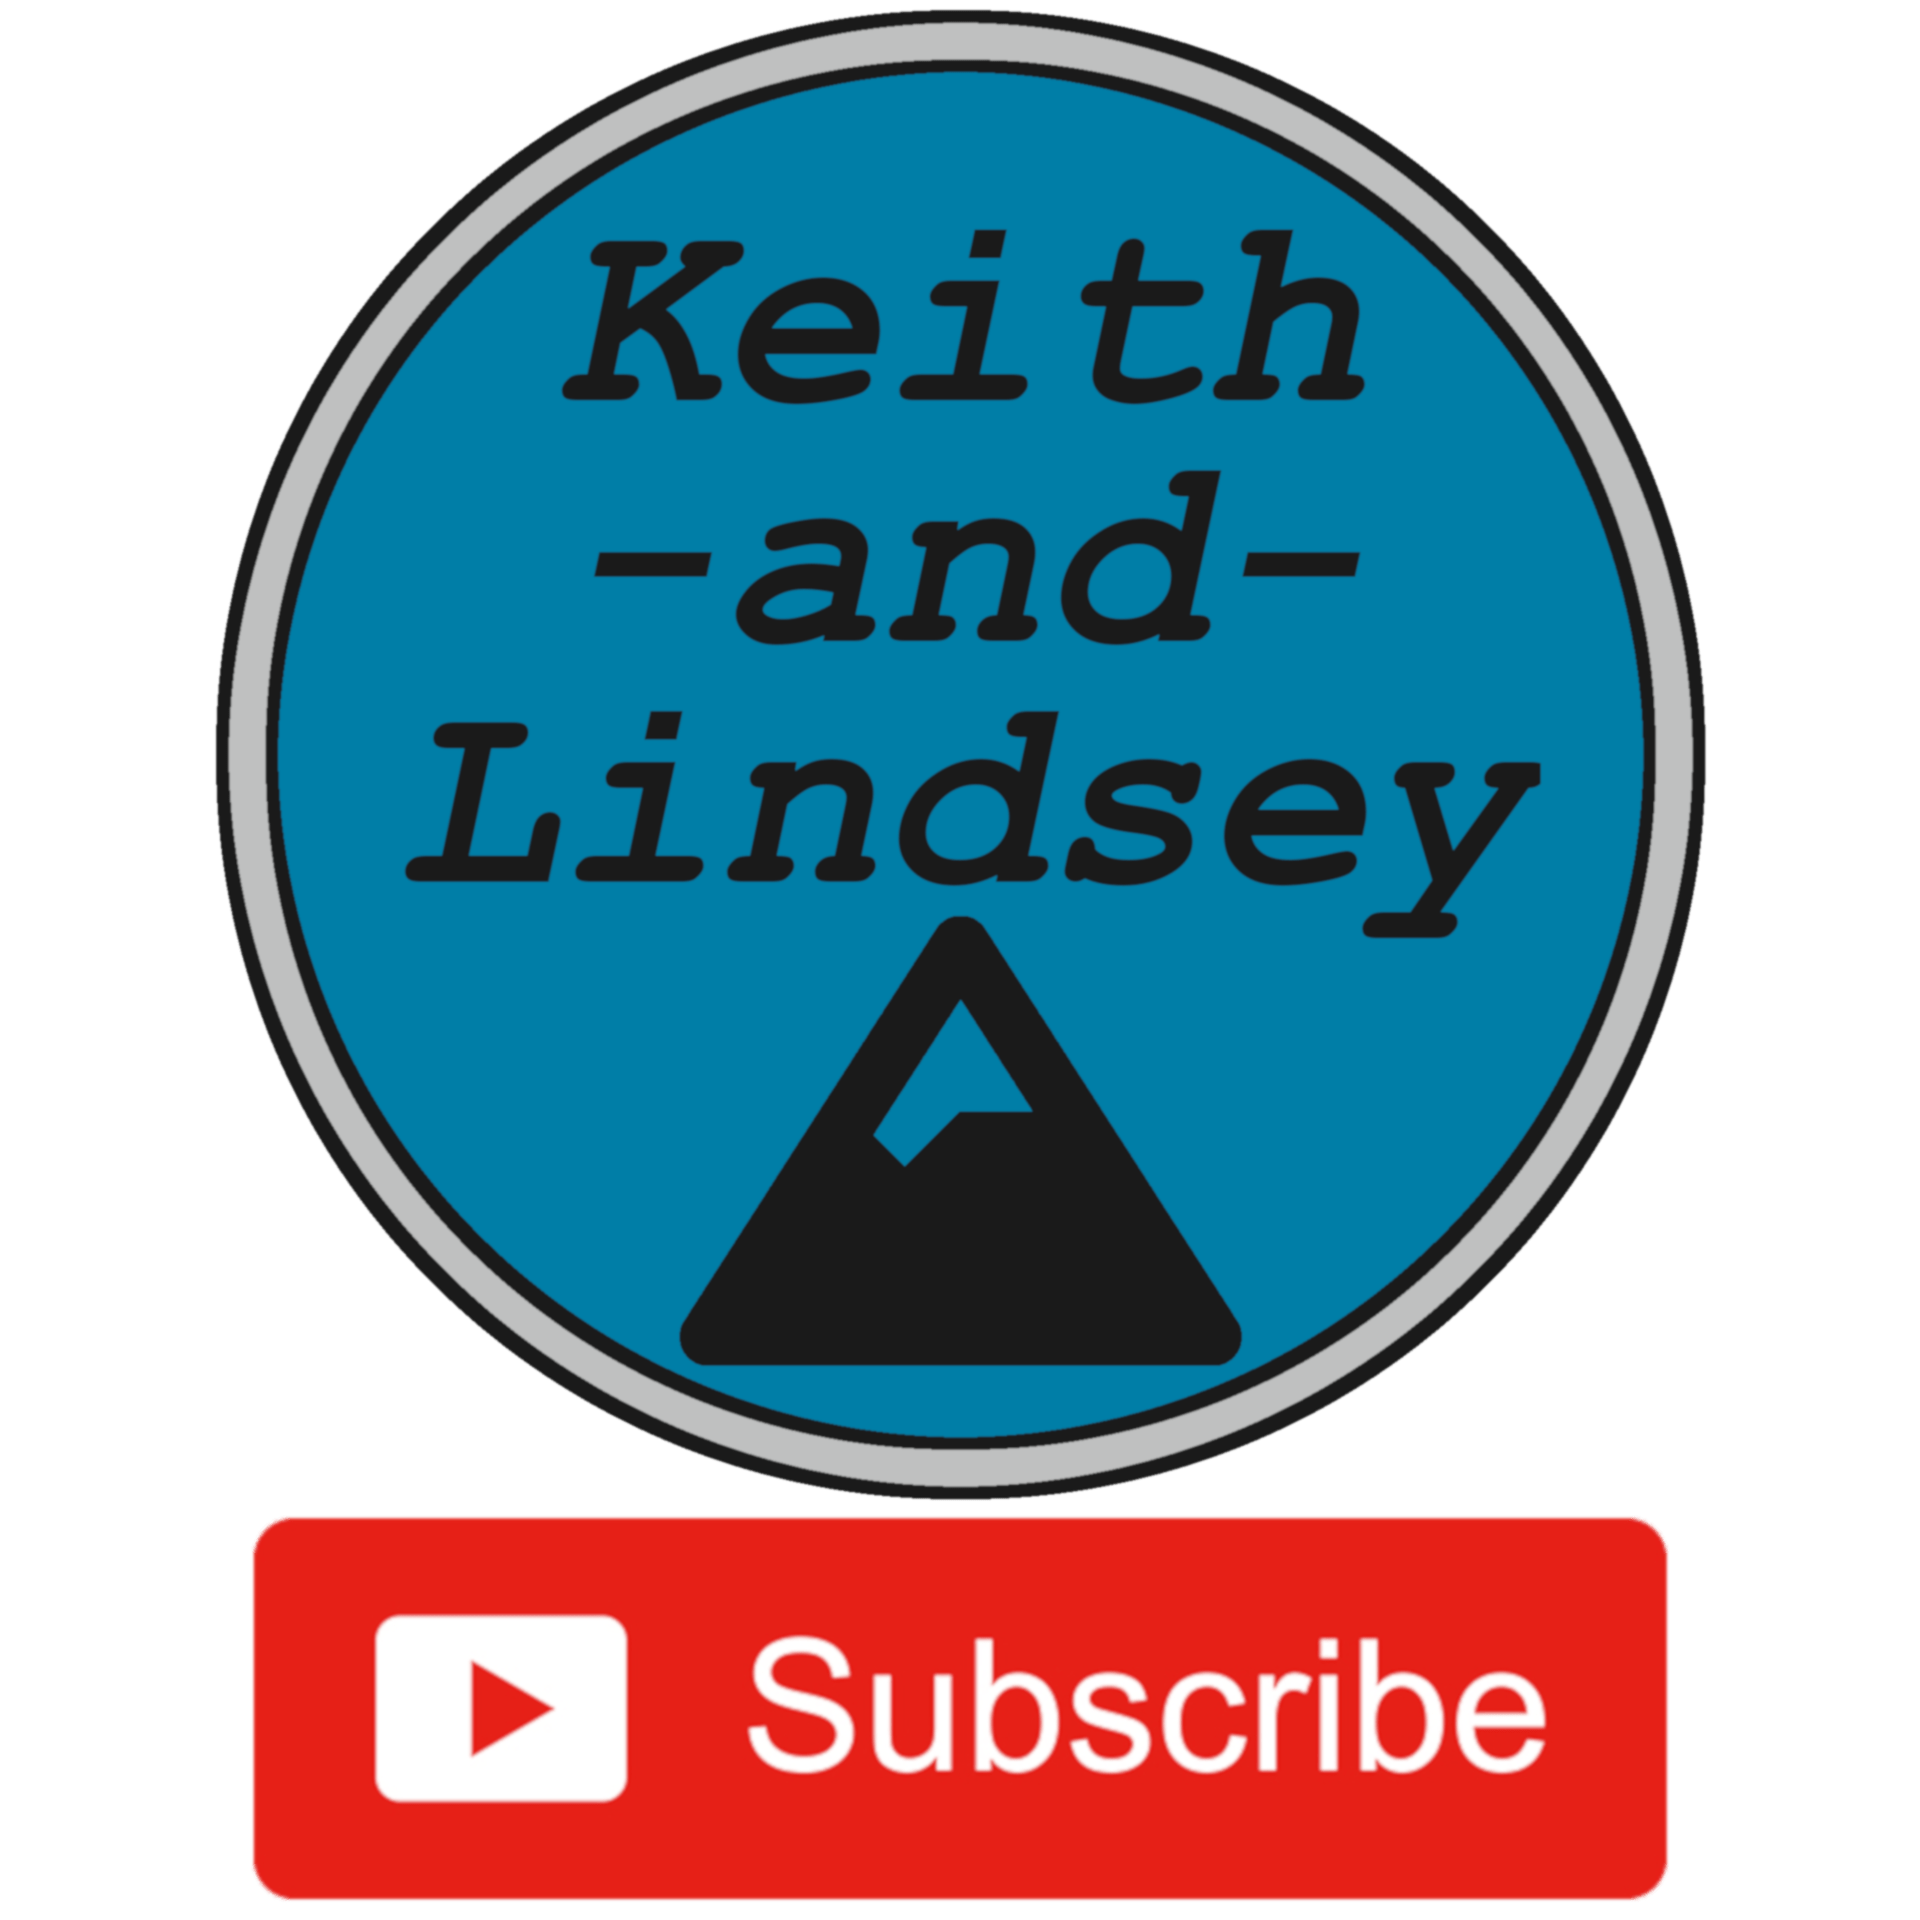 Our YouTube channel logo and subscribe button